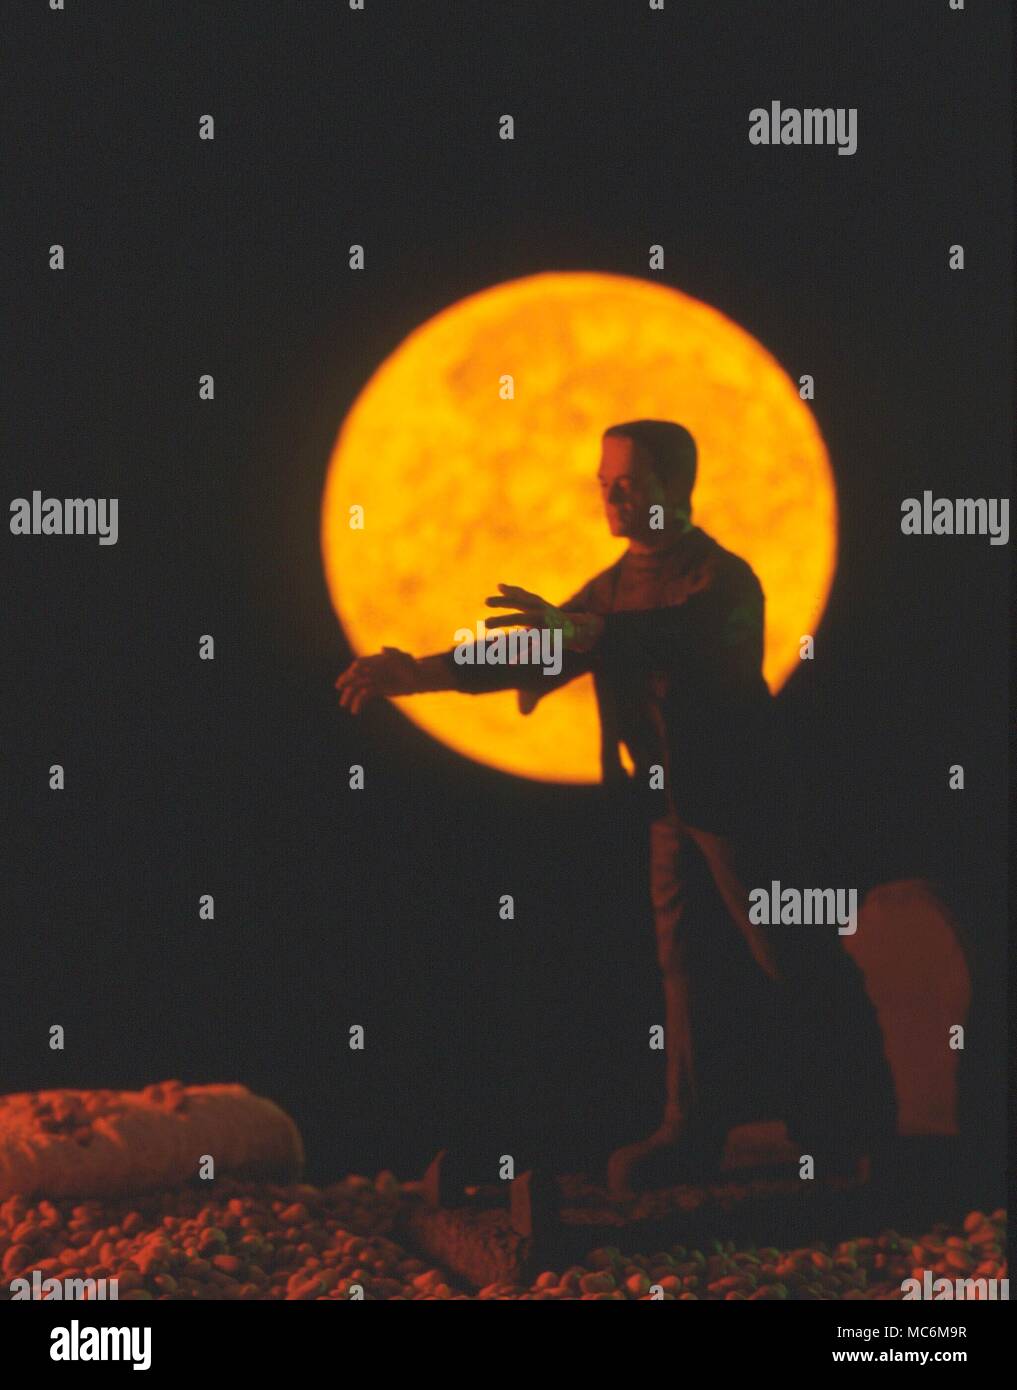 FRANKENSTEIN - Frankenstein's monster prowling near a grave against a full moon. Stage model used for display, private collection Stock Photo